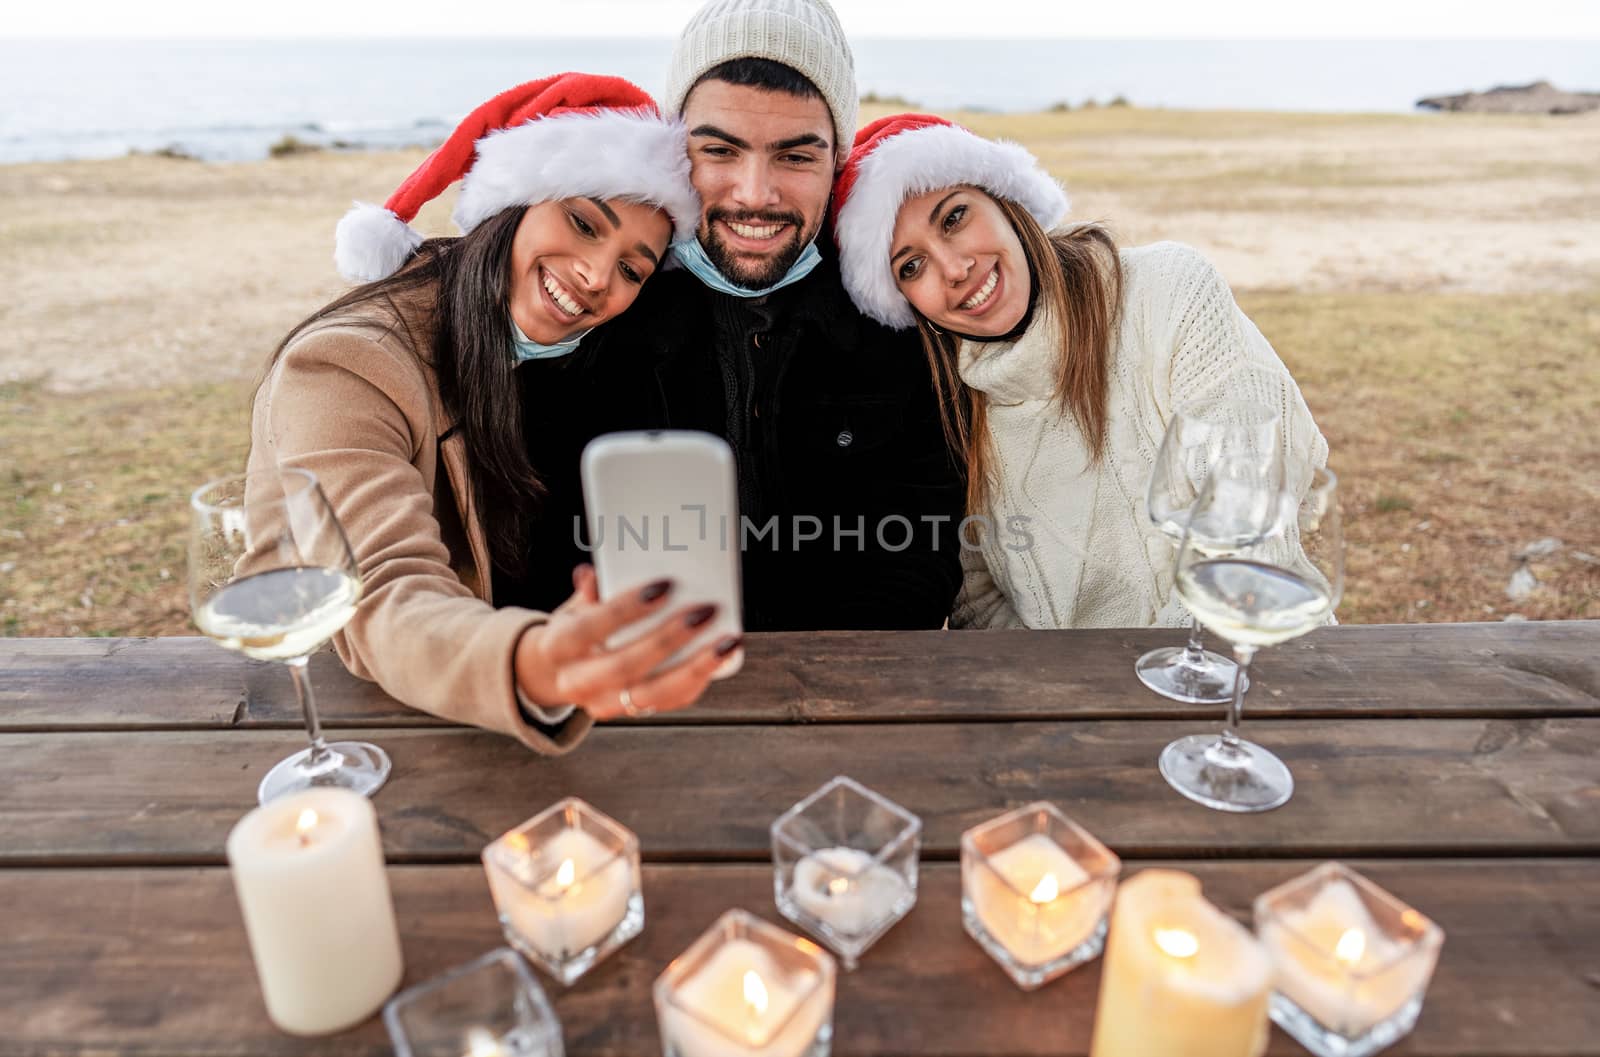 Three mixed race friends with lowered mask sitting on a wooden table outdoor in sea resort celebrating Christmas and New Year event making selfie with wine glasses - Smiling women posing in Santa hat by robbyfontanesi